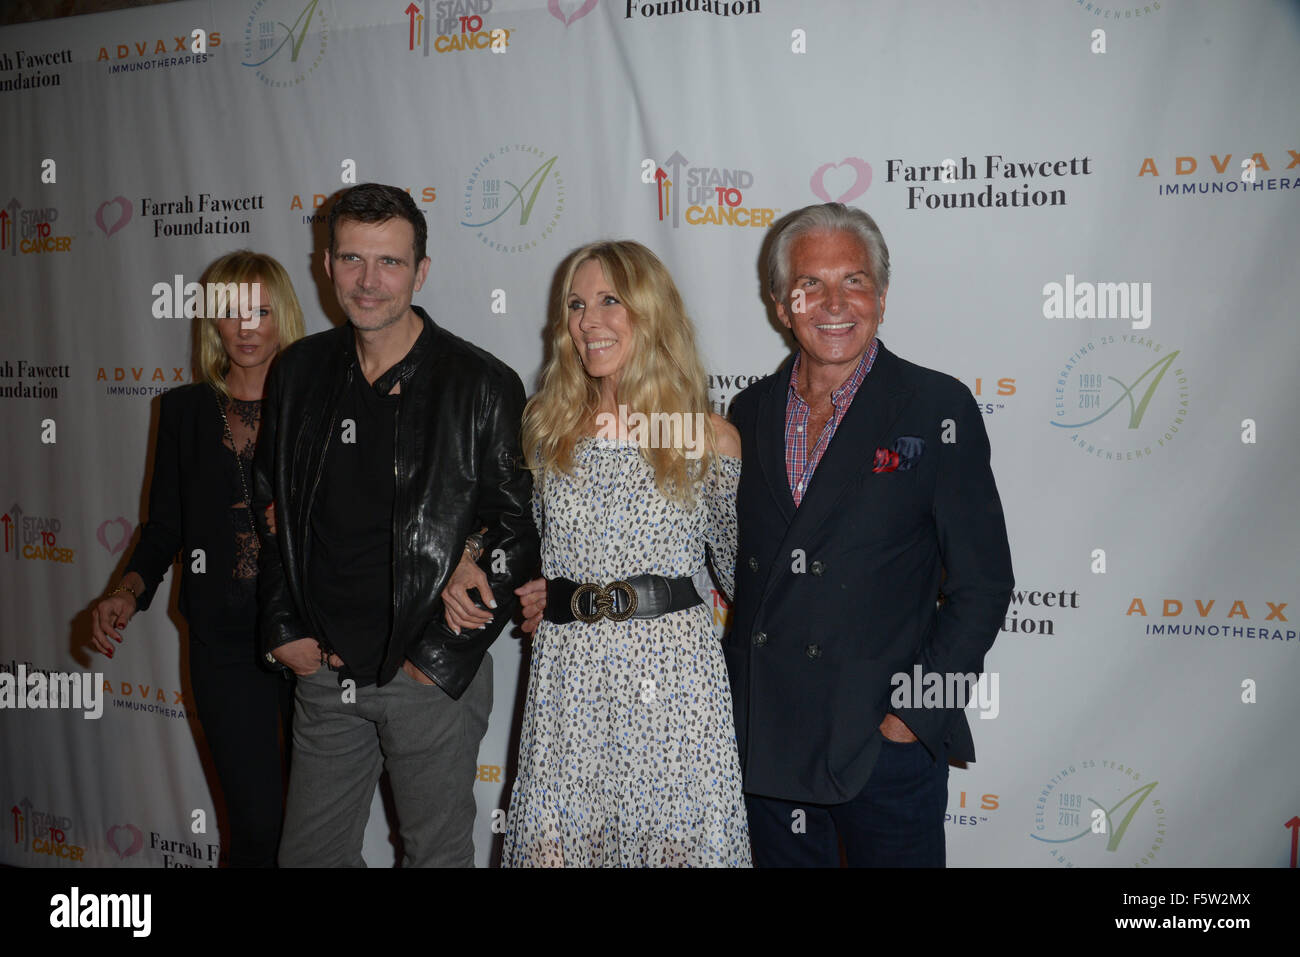 Farrah Fawcett Foundation Presents First Annual 'Tex-Mex Fiesta' Benefiting Stand Up to Cancer: Event Honors Jaclyn Smith, Lipstick Angels and Advaxis, Inc.  Featuring: Kimberly Stewart, Ashley Hamilton, Alana Stewart, George Hamilton Where: Los Angeles, Stock Photo